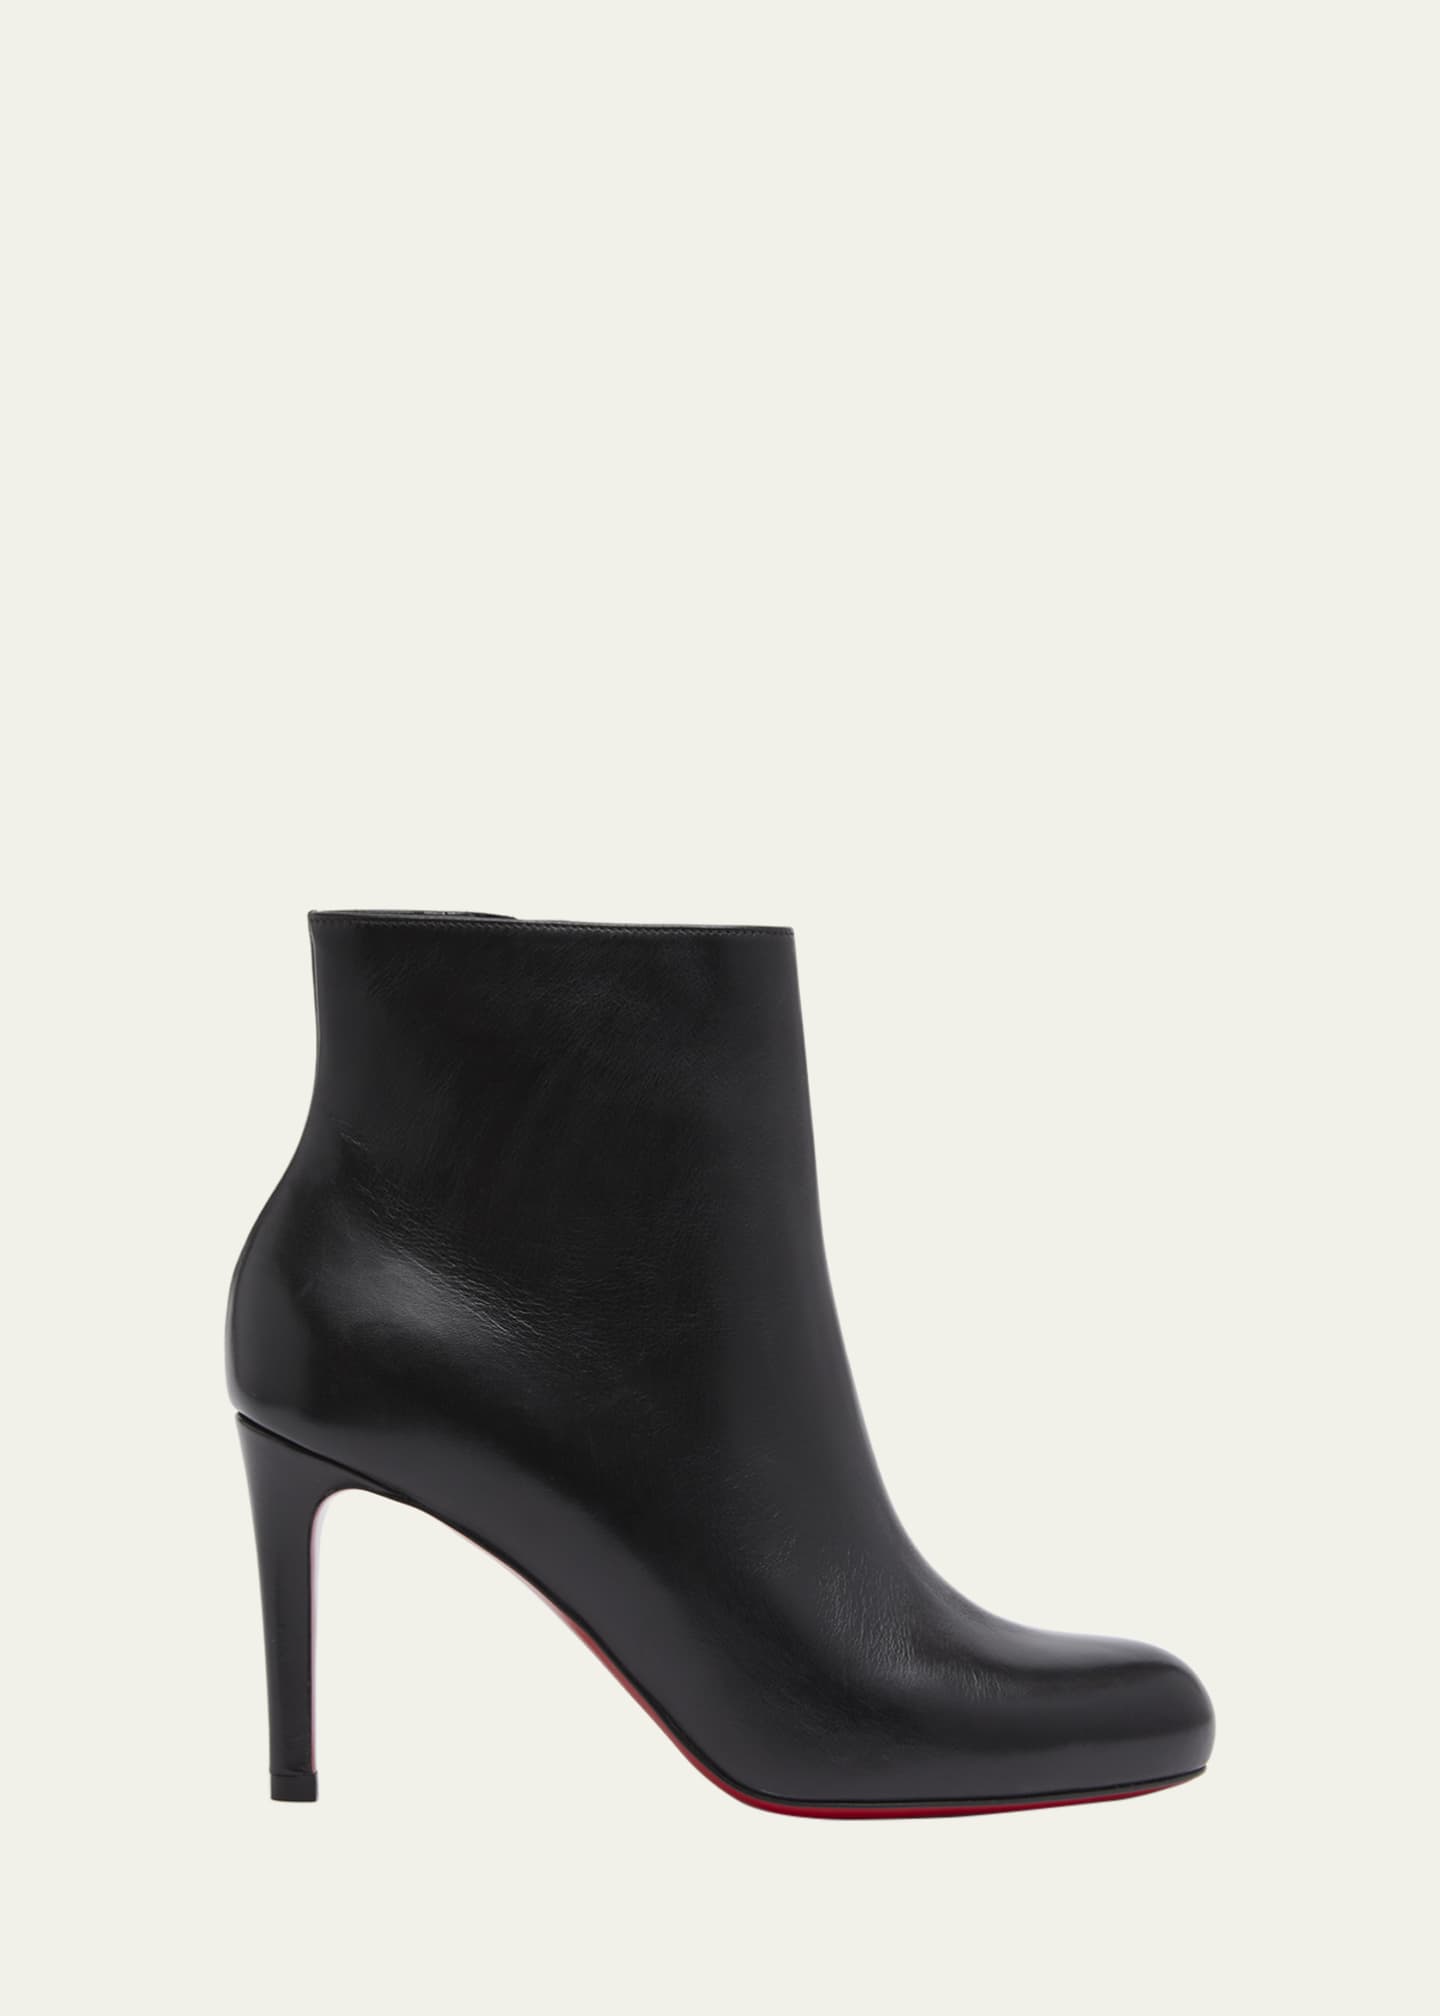 Christian Louboutin Pumppie Red Sole Leather Ankle Boots - Bergdorf Goodman